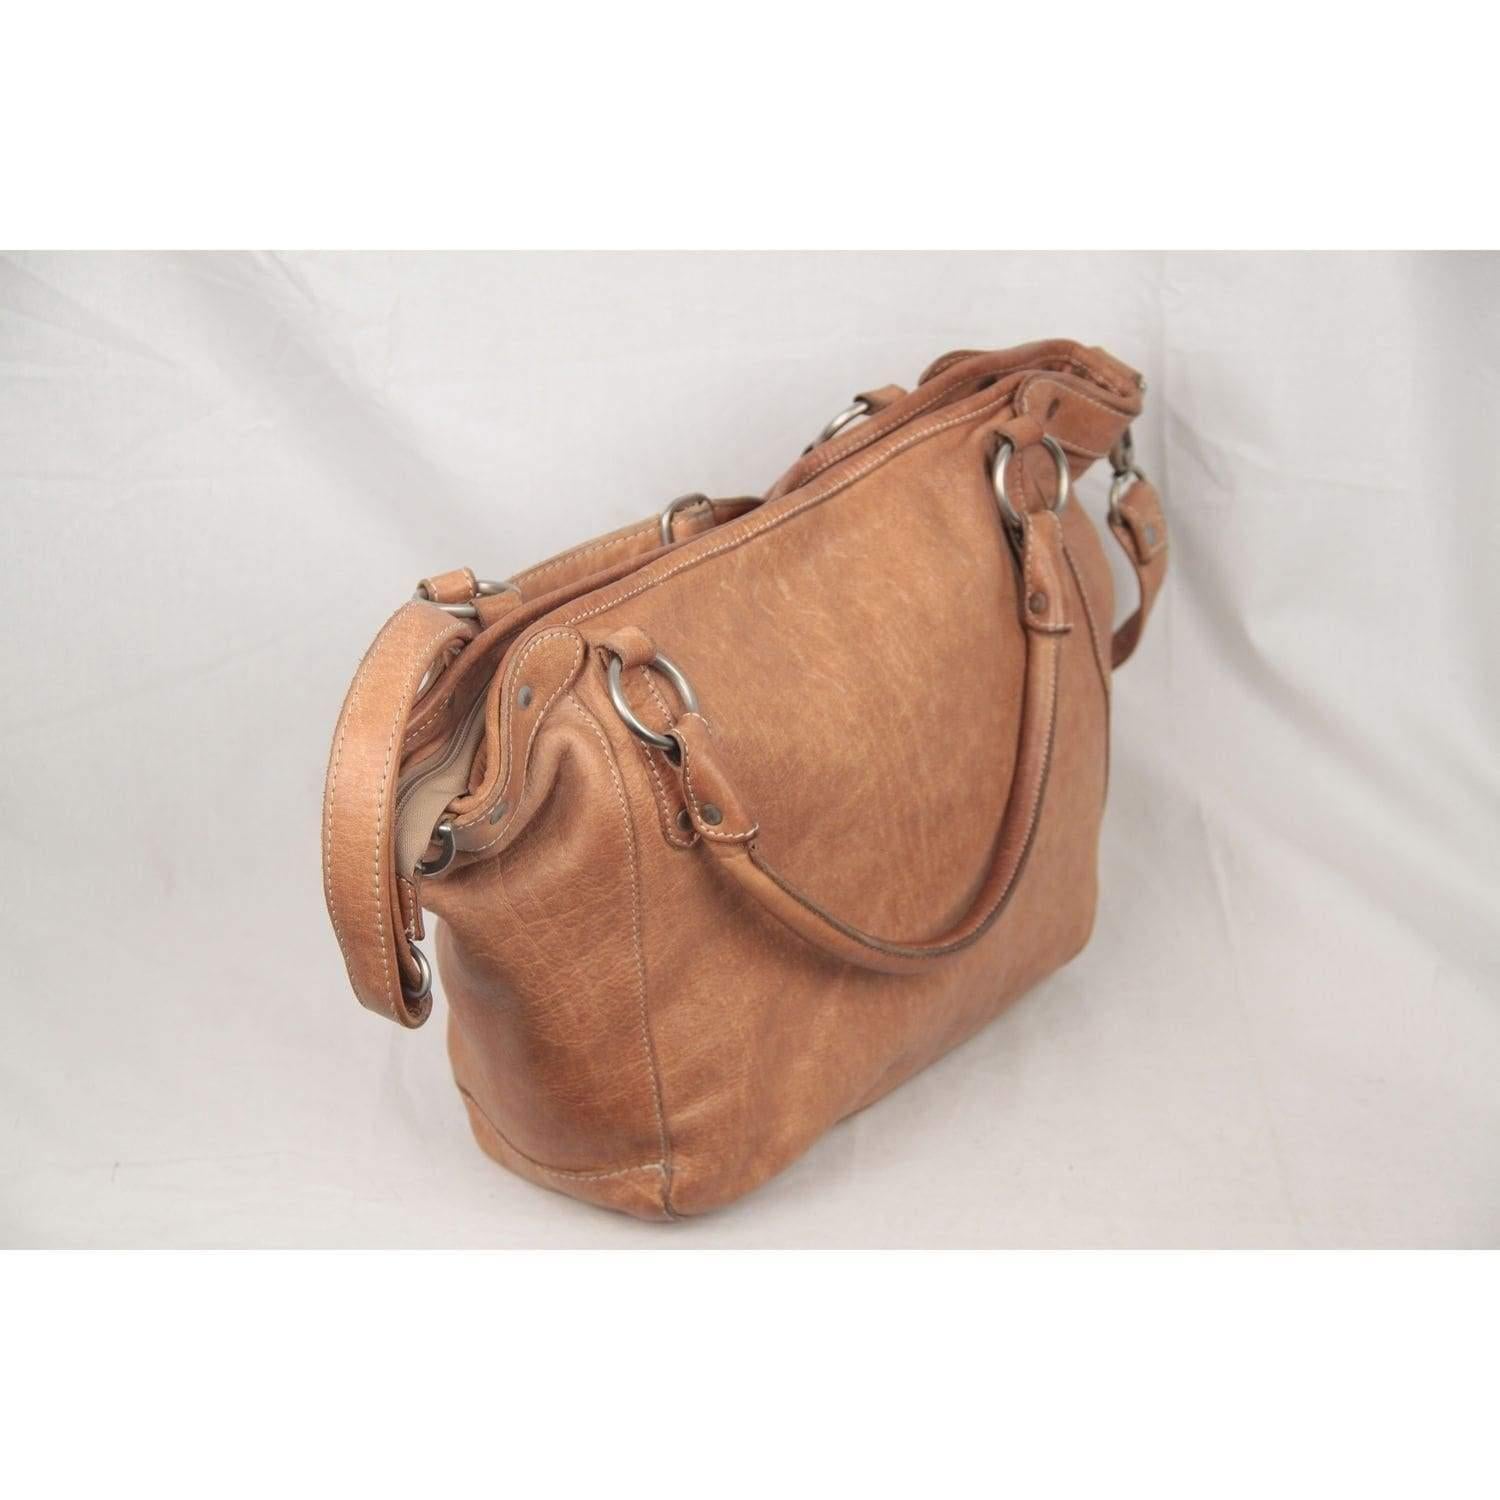 COWBOYSBAG Tan Leather Tote Urban Shoulder Bag with Strap In Excellent Condition In Rome, Rome